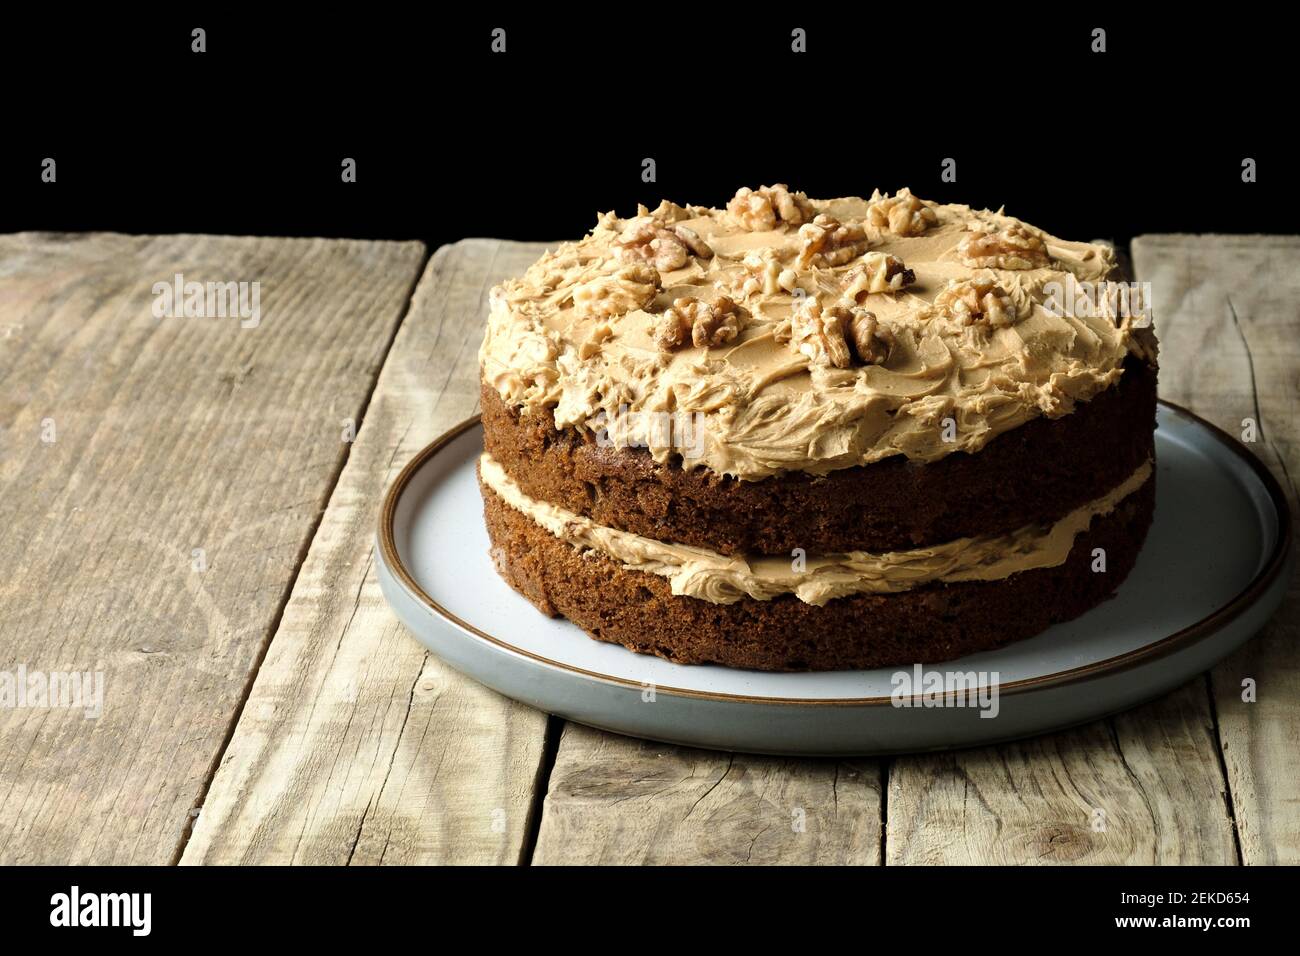 A traditional Walnut and Coffee cake. The cake is generously topped with buttercream and walnuts. A Nigella Lawson recipe cake Stock Photo